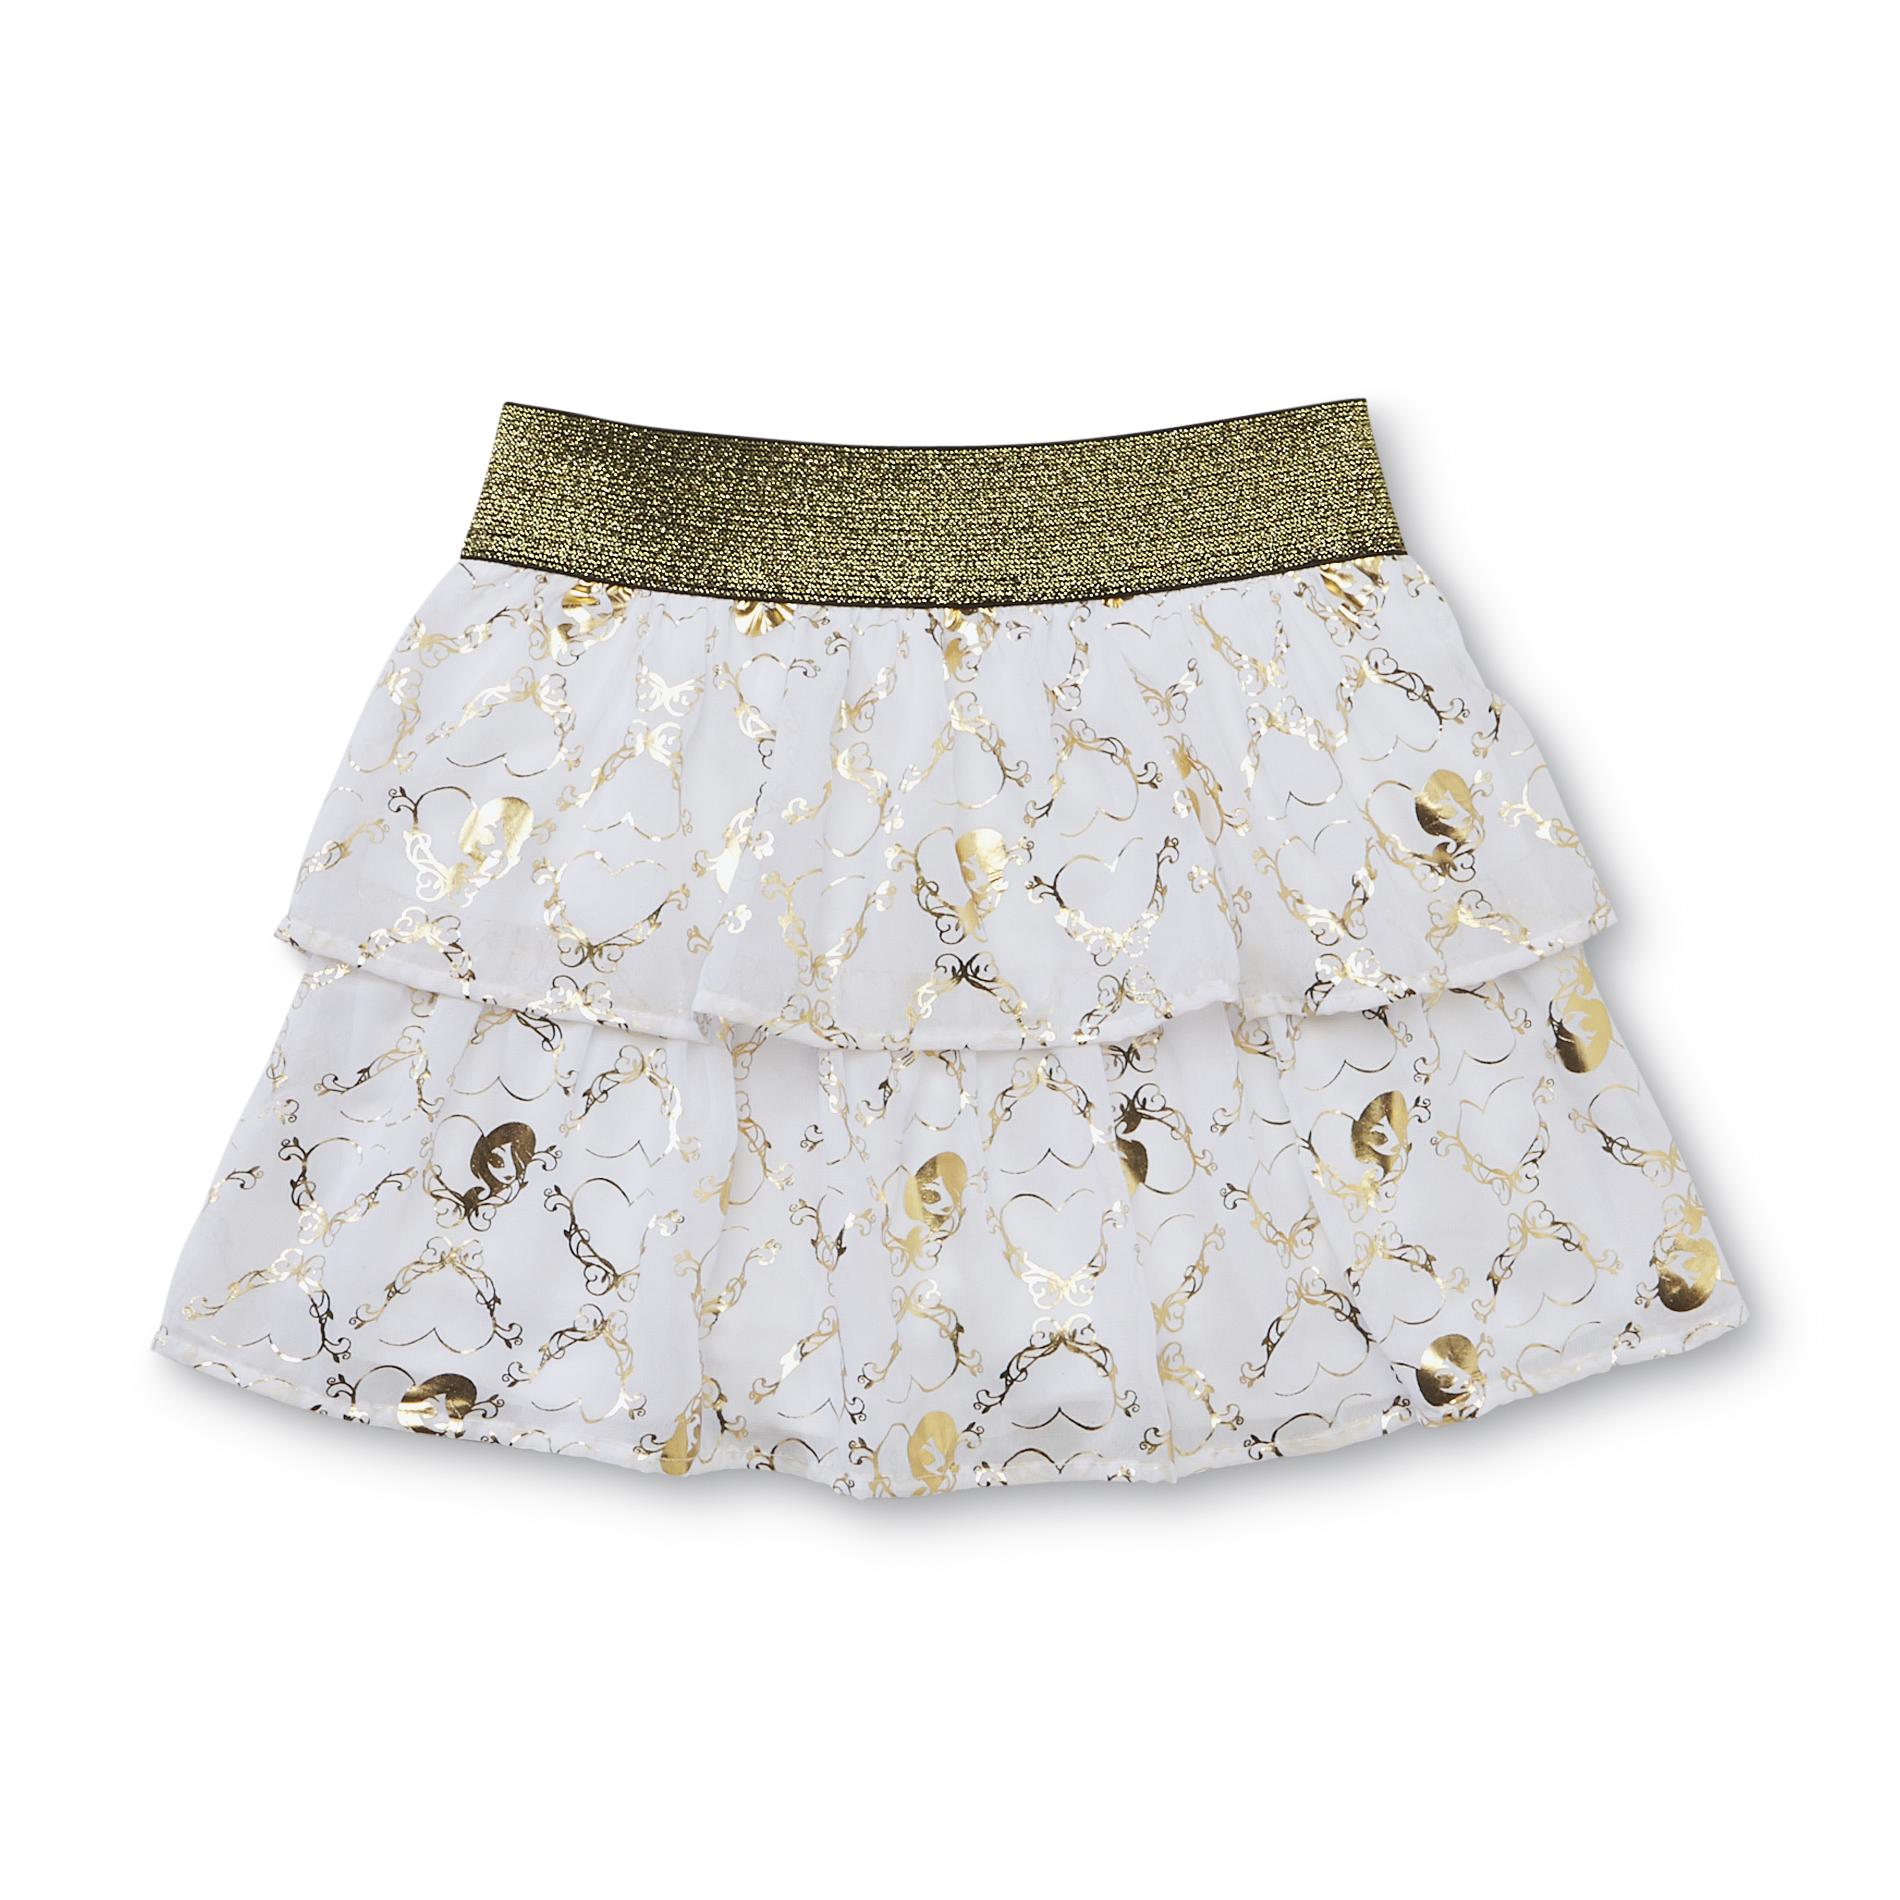 Ever After High Girl's Scooter Skirt - Metallic Hearts